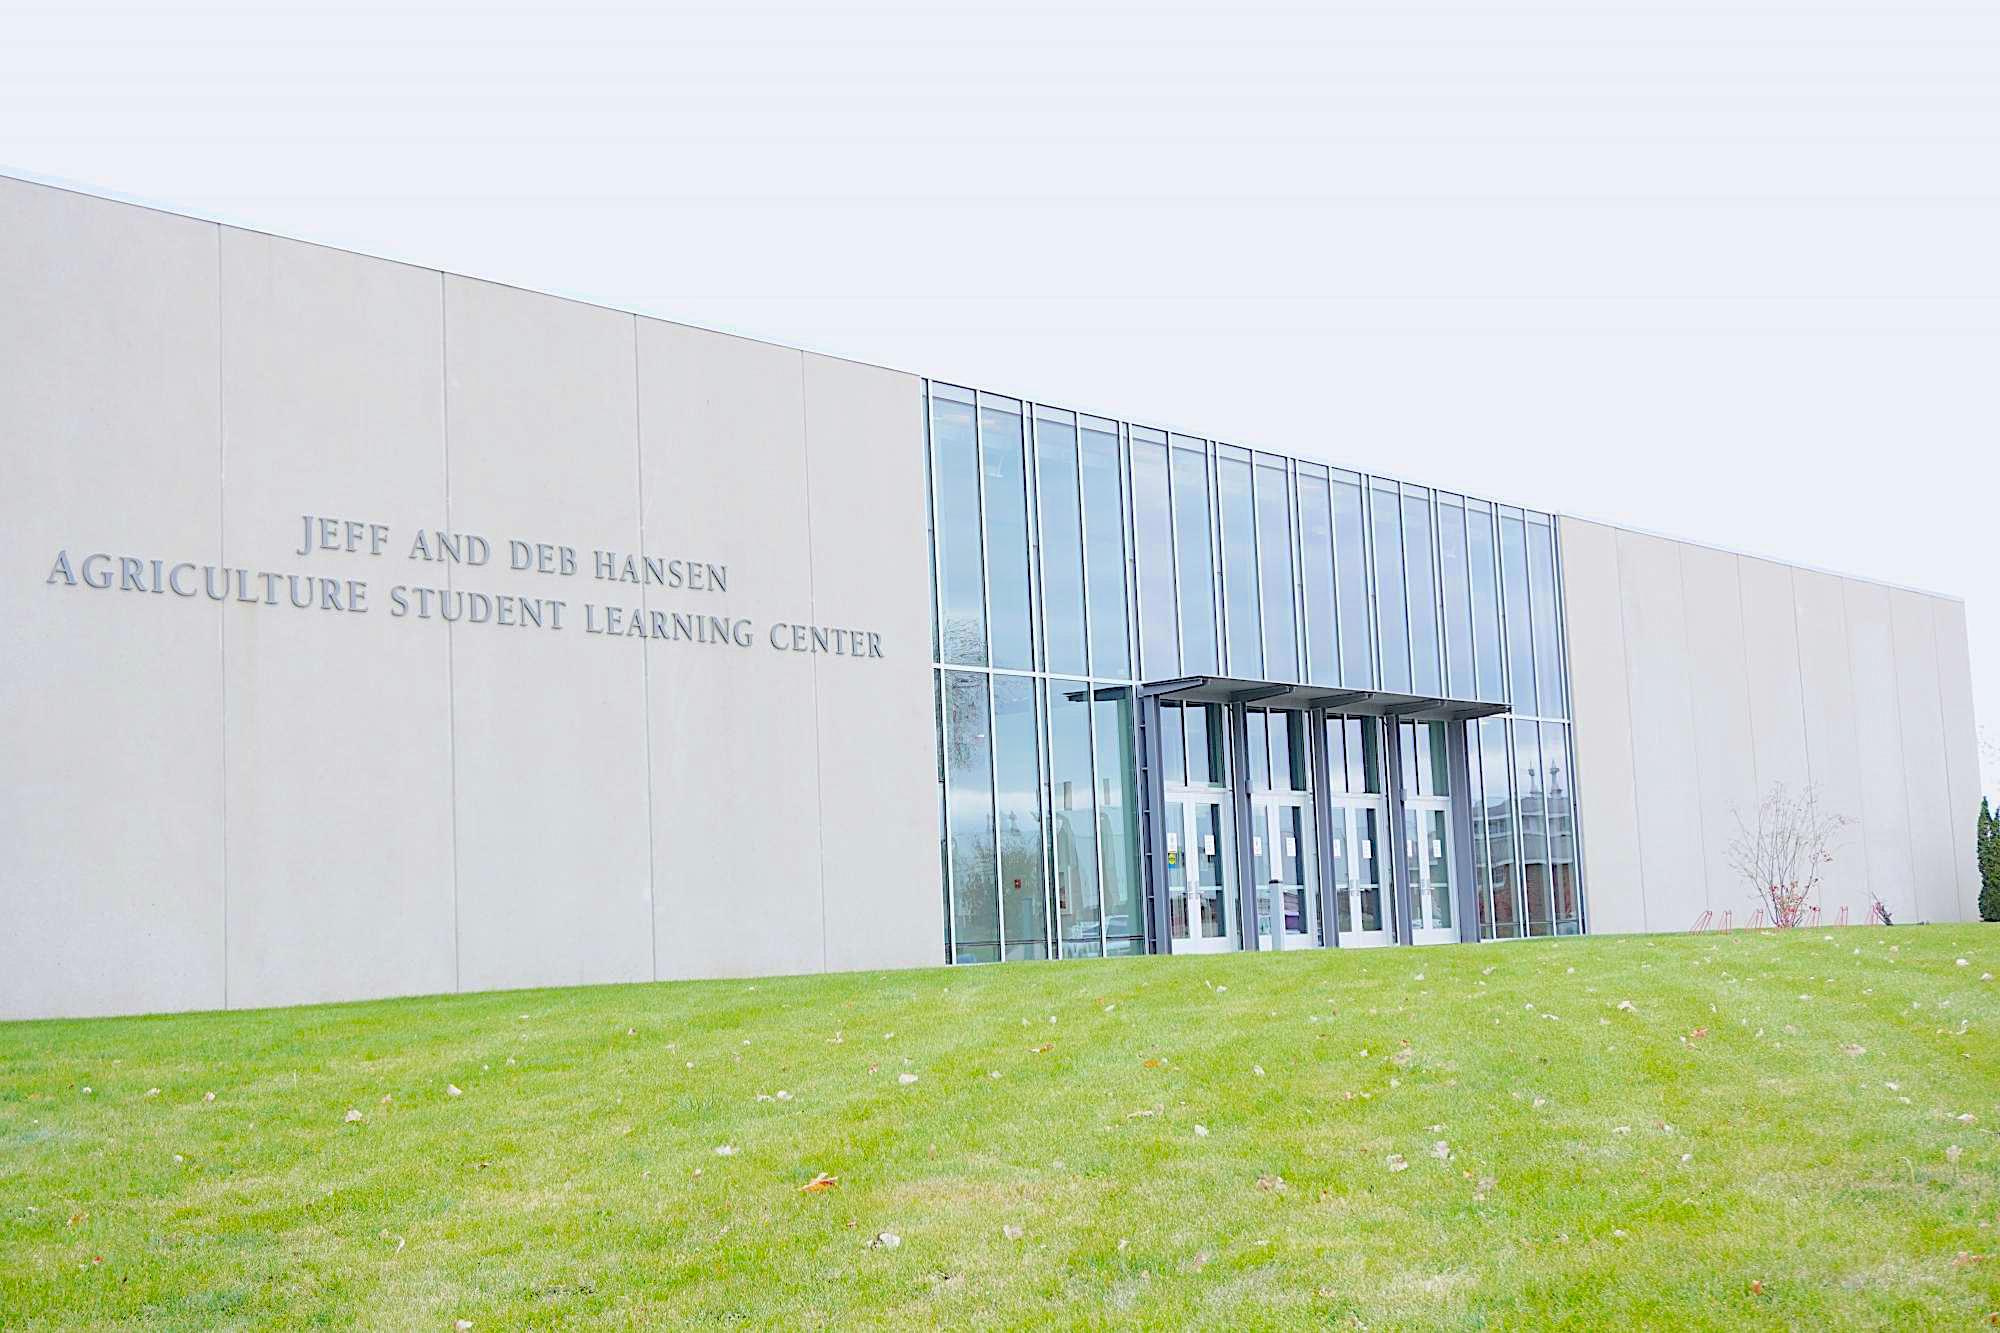 Hansen Agriculture Student Learning Center